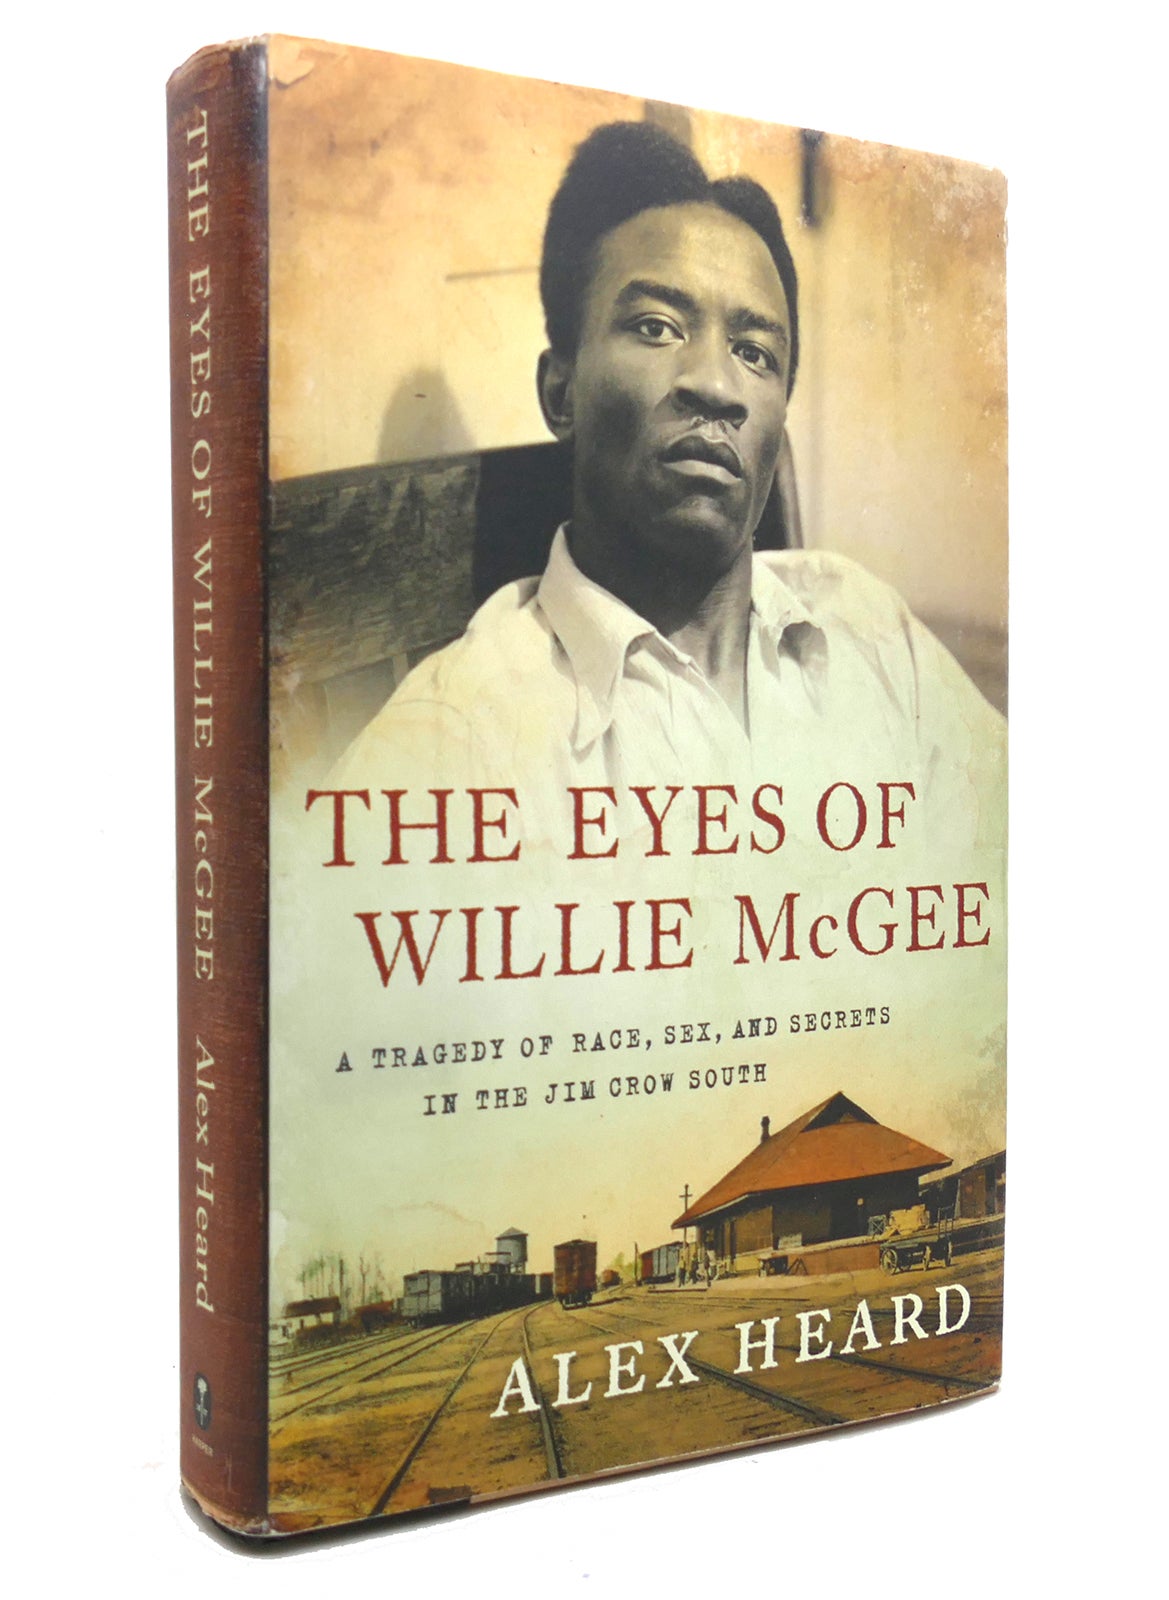 The Eyes of Willie McGee: A Tragedy of Race, Sex, and Secrets in